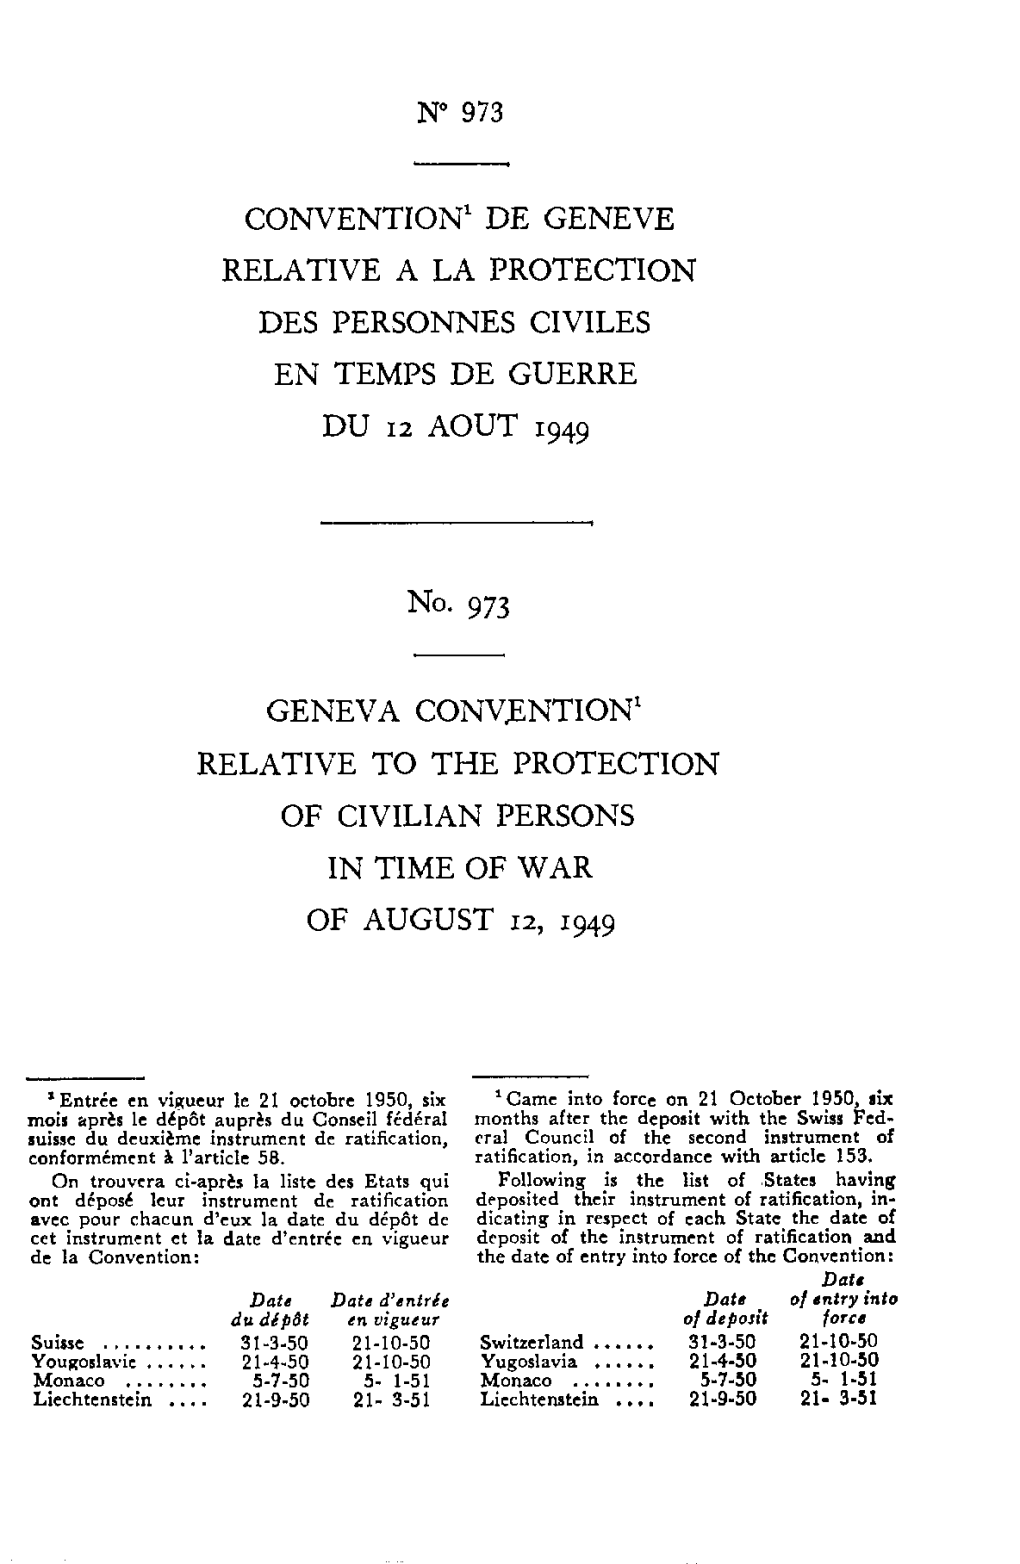 Geneva Convention Relative to the Protection of Civilian Persons in Time Of